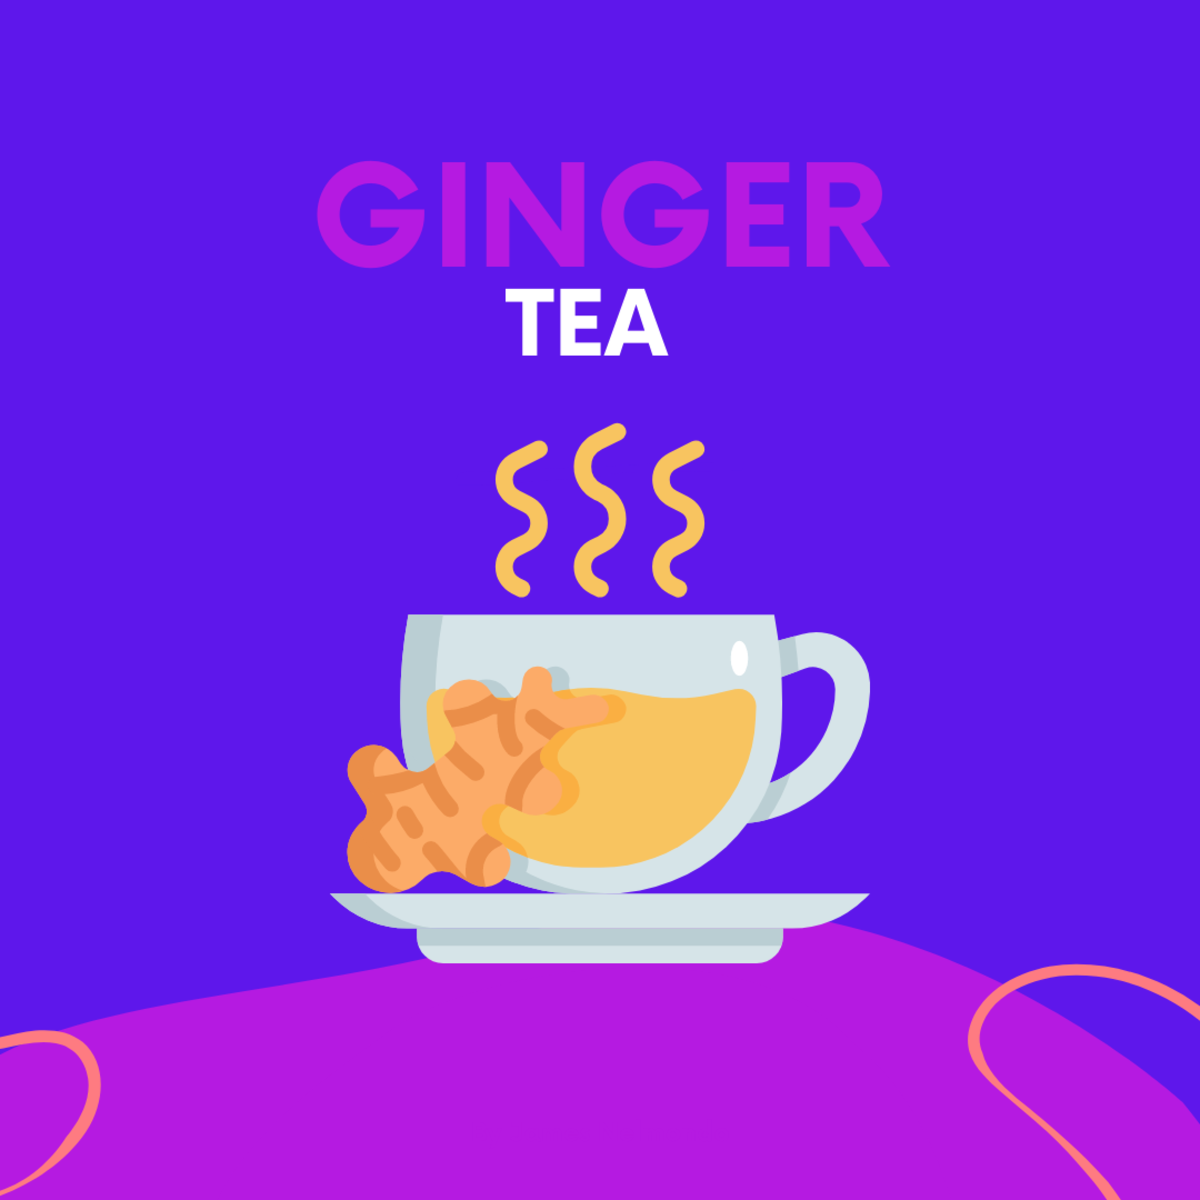 Ginger tea to help manage your nausea and hydrate